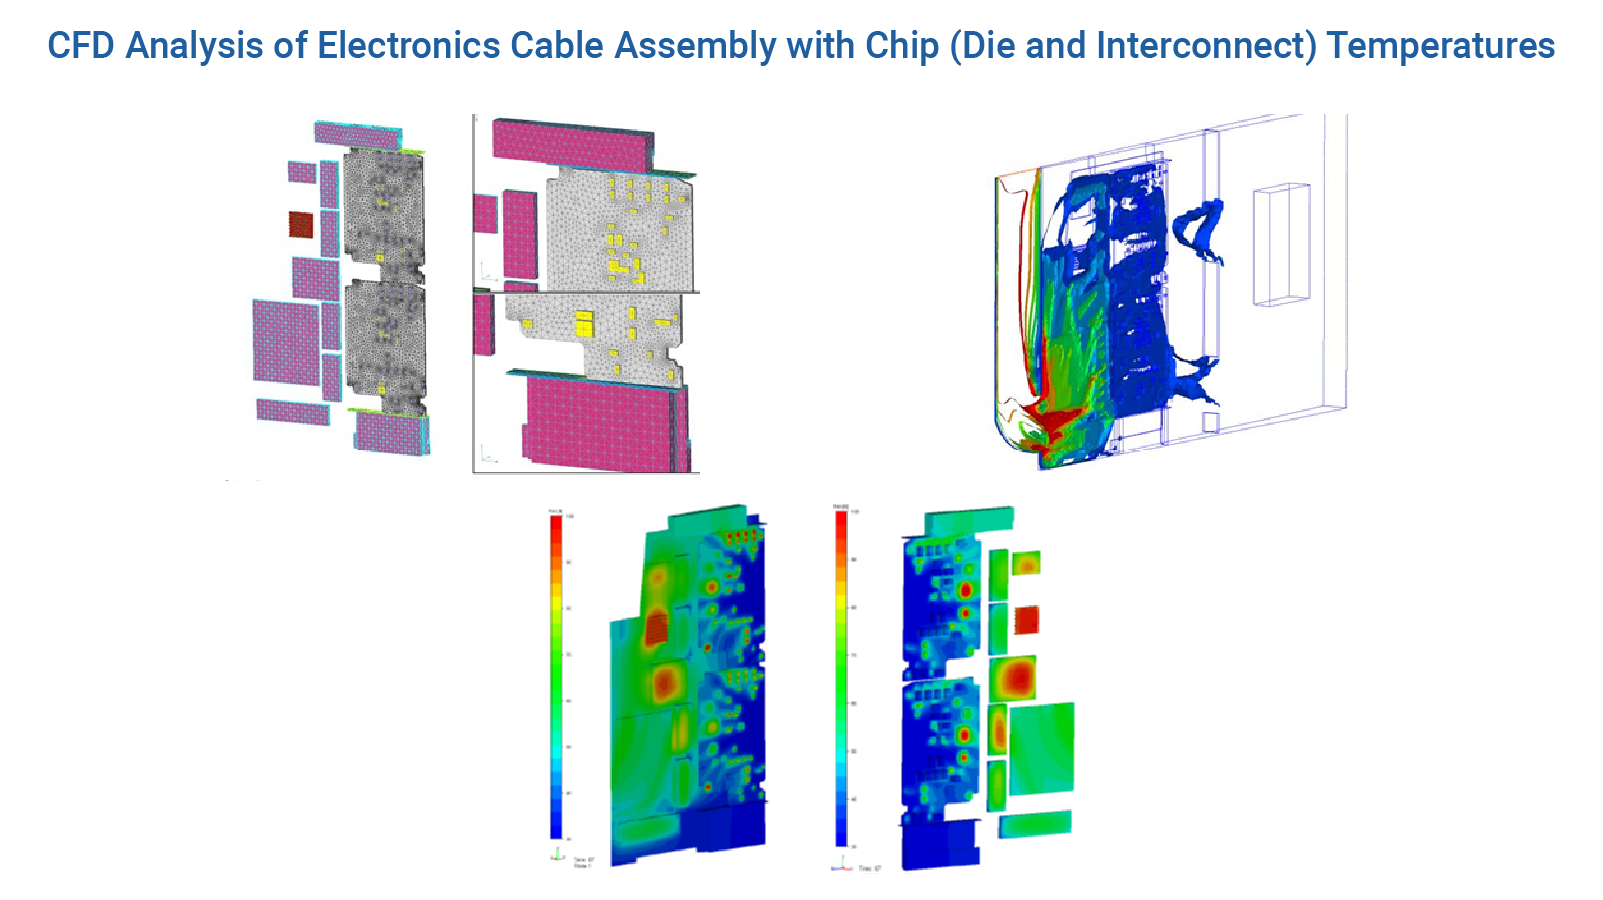 CFD Analysis of Electronics Cable Assembly with Chip (Die and Interconnect) Temperatures - Predictive Engineering CFD Consulting Services